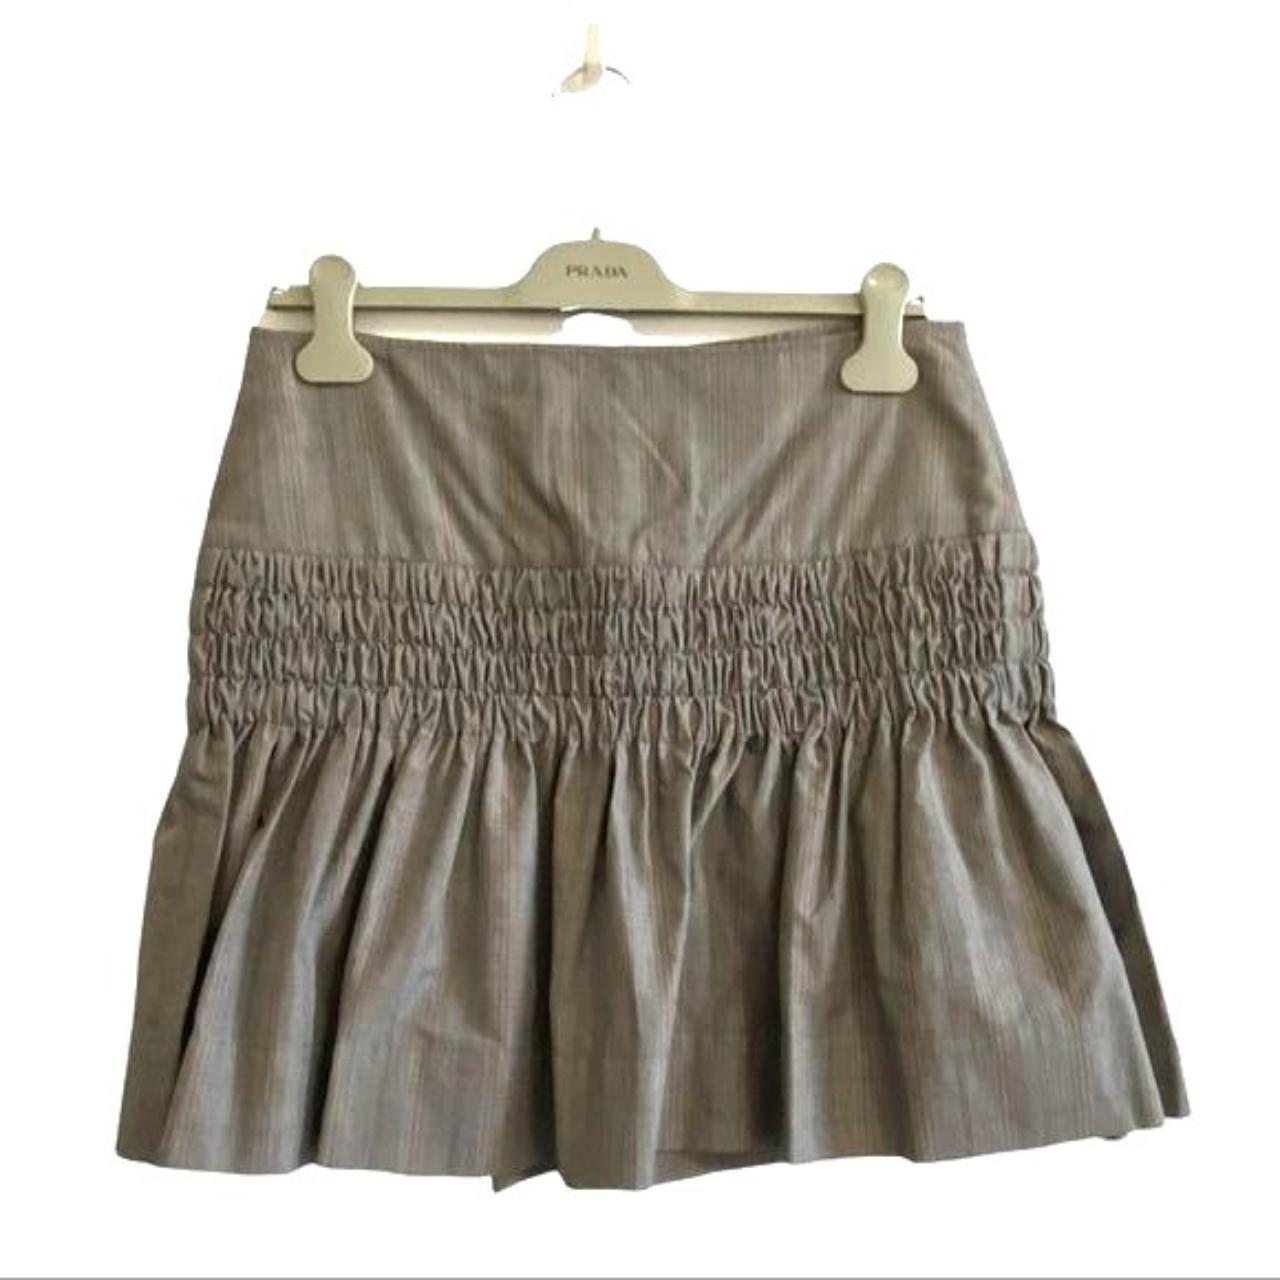 Product Image 1 - Brand new with tag
Isabel Marant